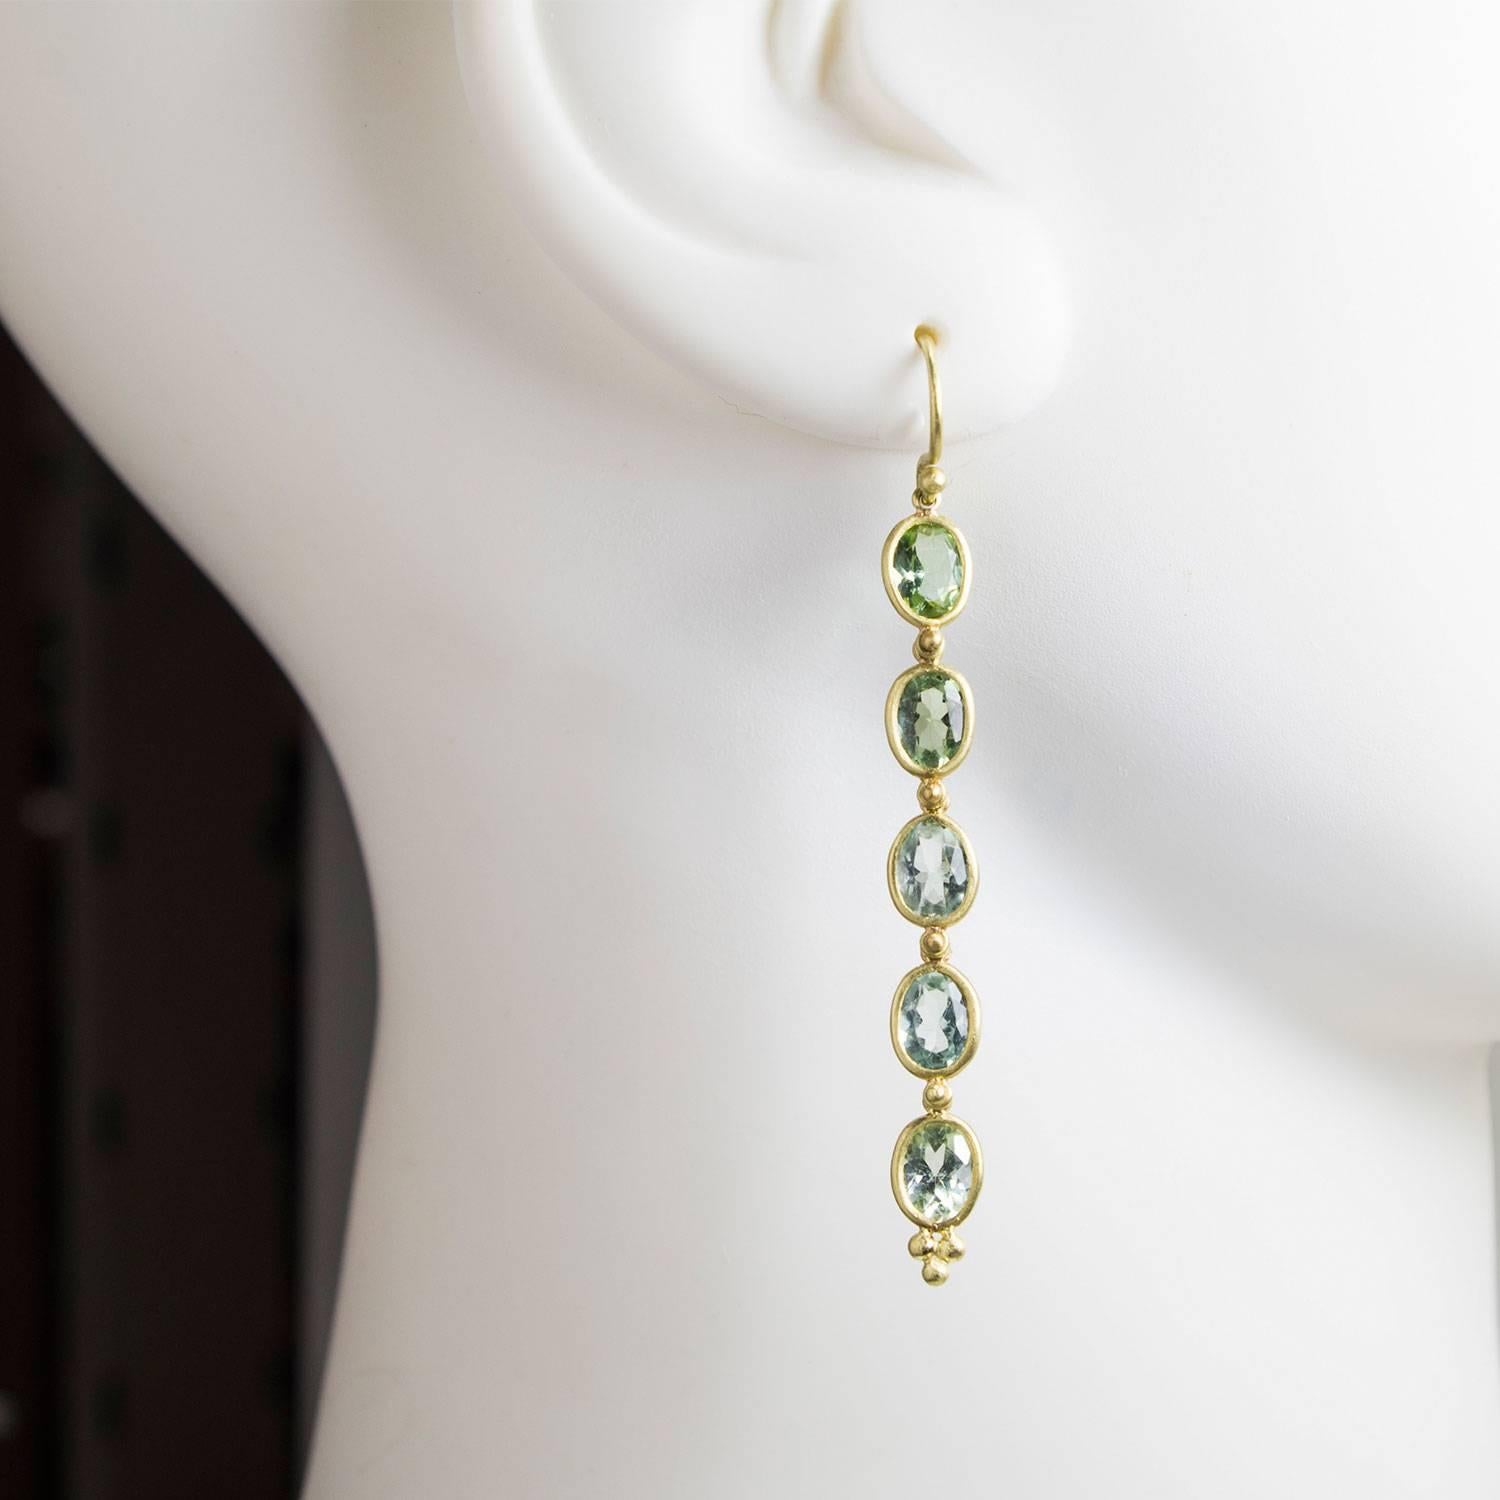 Beautiful shades of blue-green oval faceted Beryls, handcrafted in 18k green* gold are set in bezels and linked to allow movement creating a chic and elegant silhouette.  

6.50 carats twt     French Wires  2